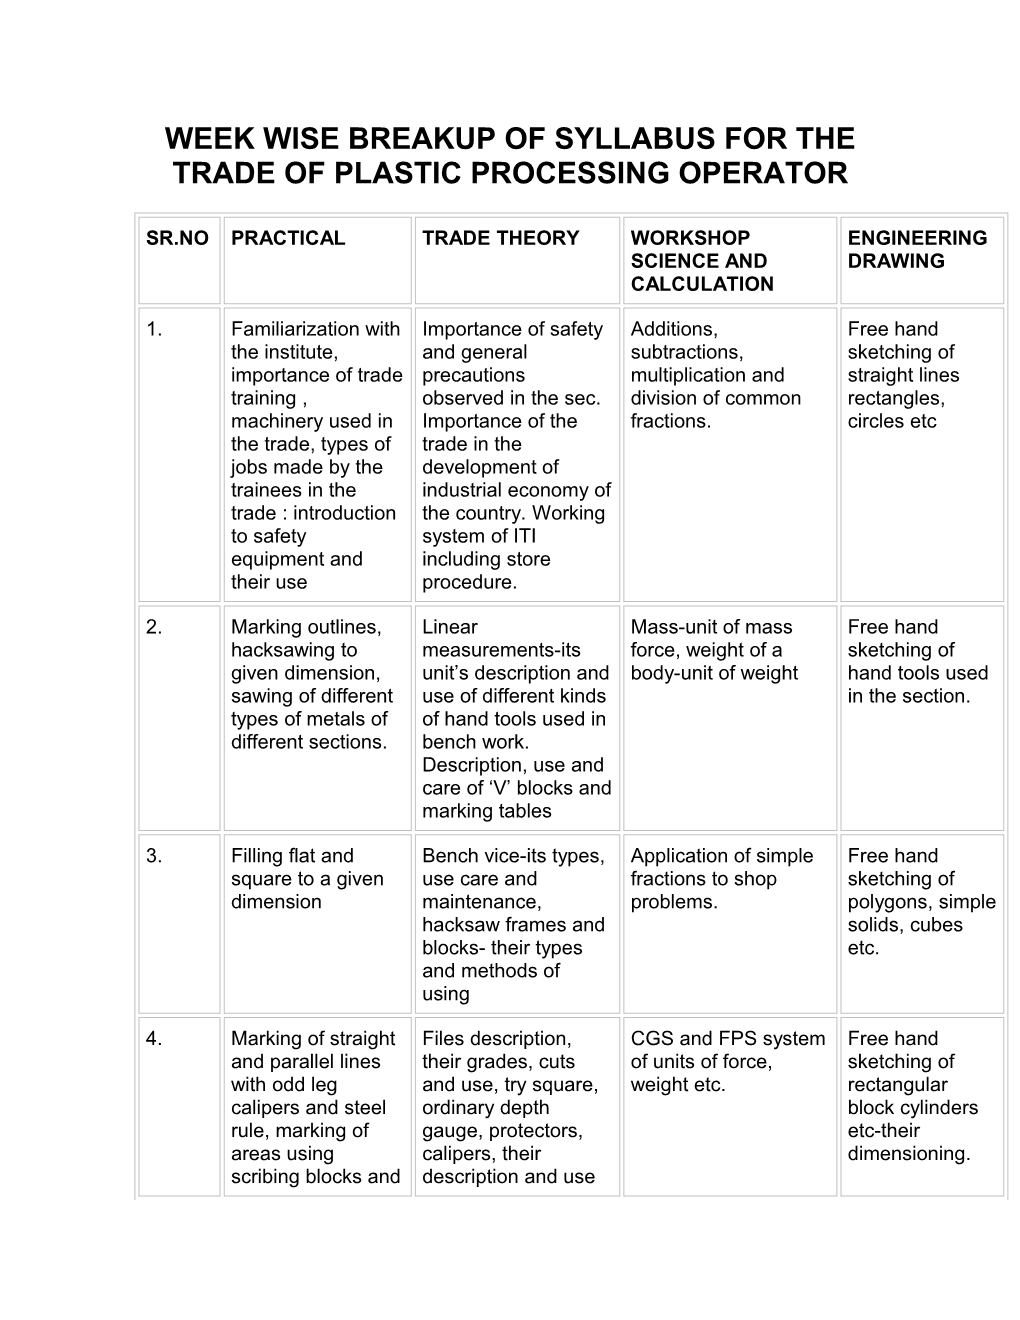 Week Wise Breakup of Syllabus for the Trade of Plastic Processing Operator